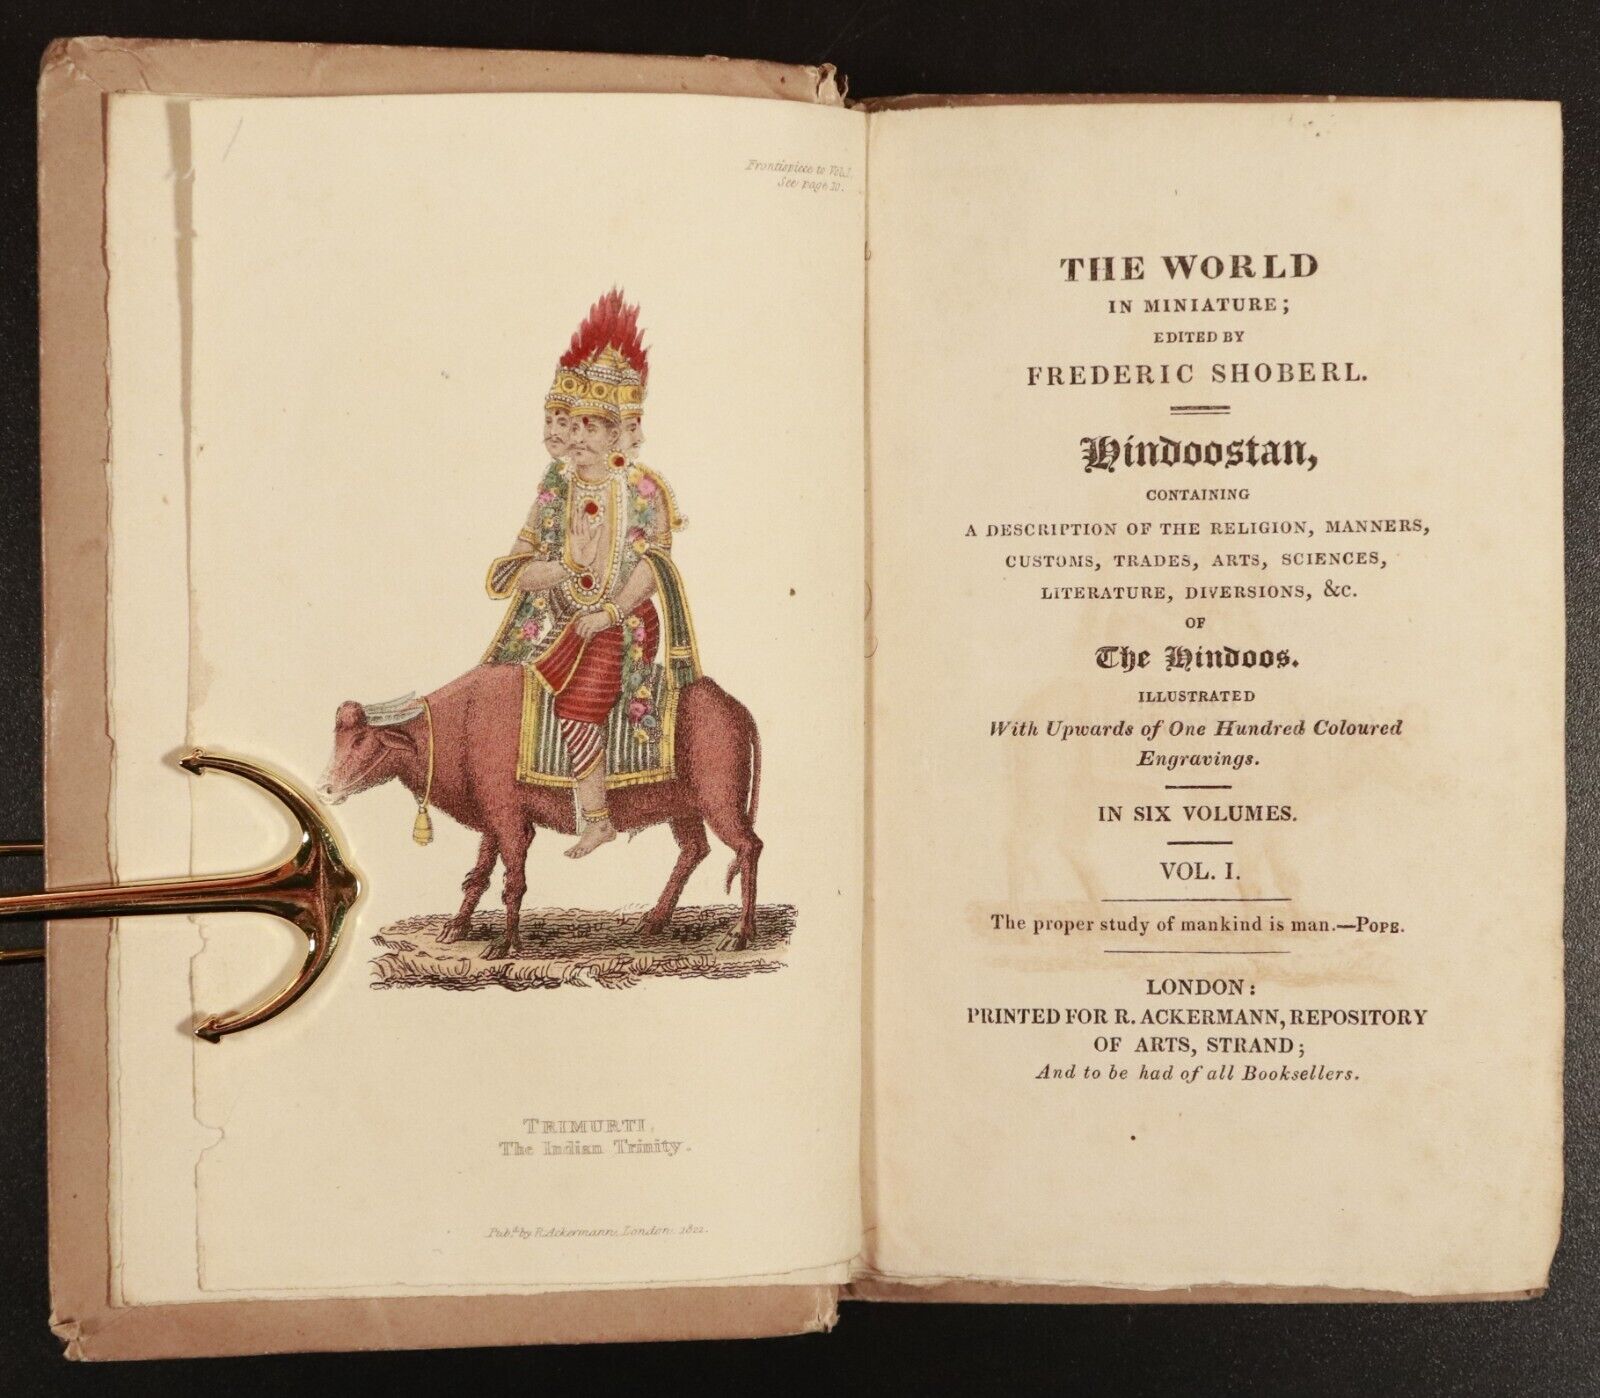 1822 4vol The World In Miniature: Hindoostan by F. Shoberl - Antiquarian Books - 0